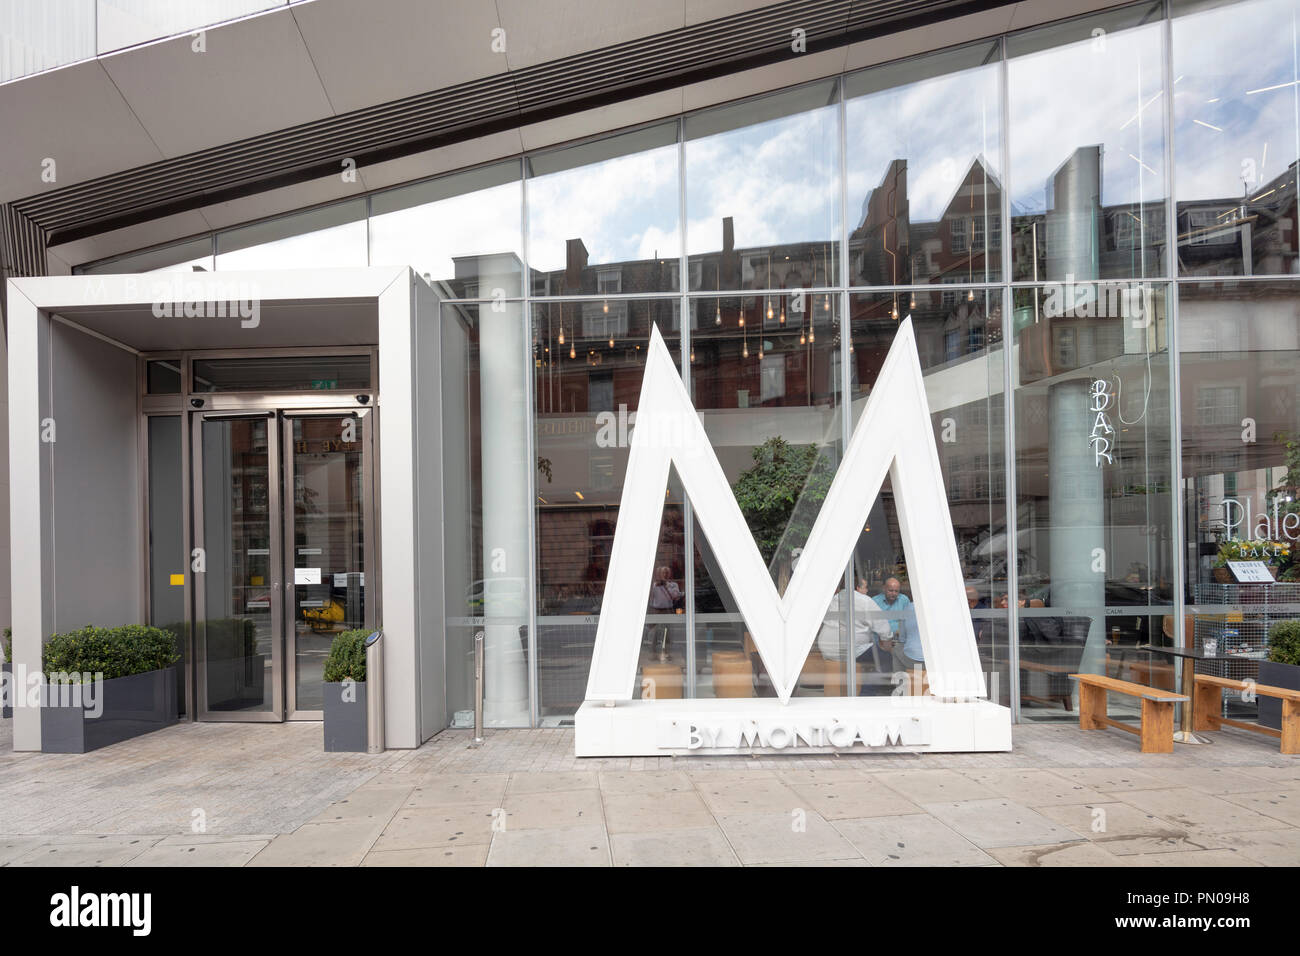 The M By Montcalm Shoreditch Tech City contemporary-style, 18-storey hotel in Central London, England, UK Stock Photo